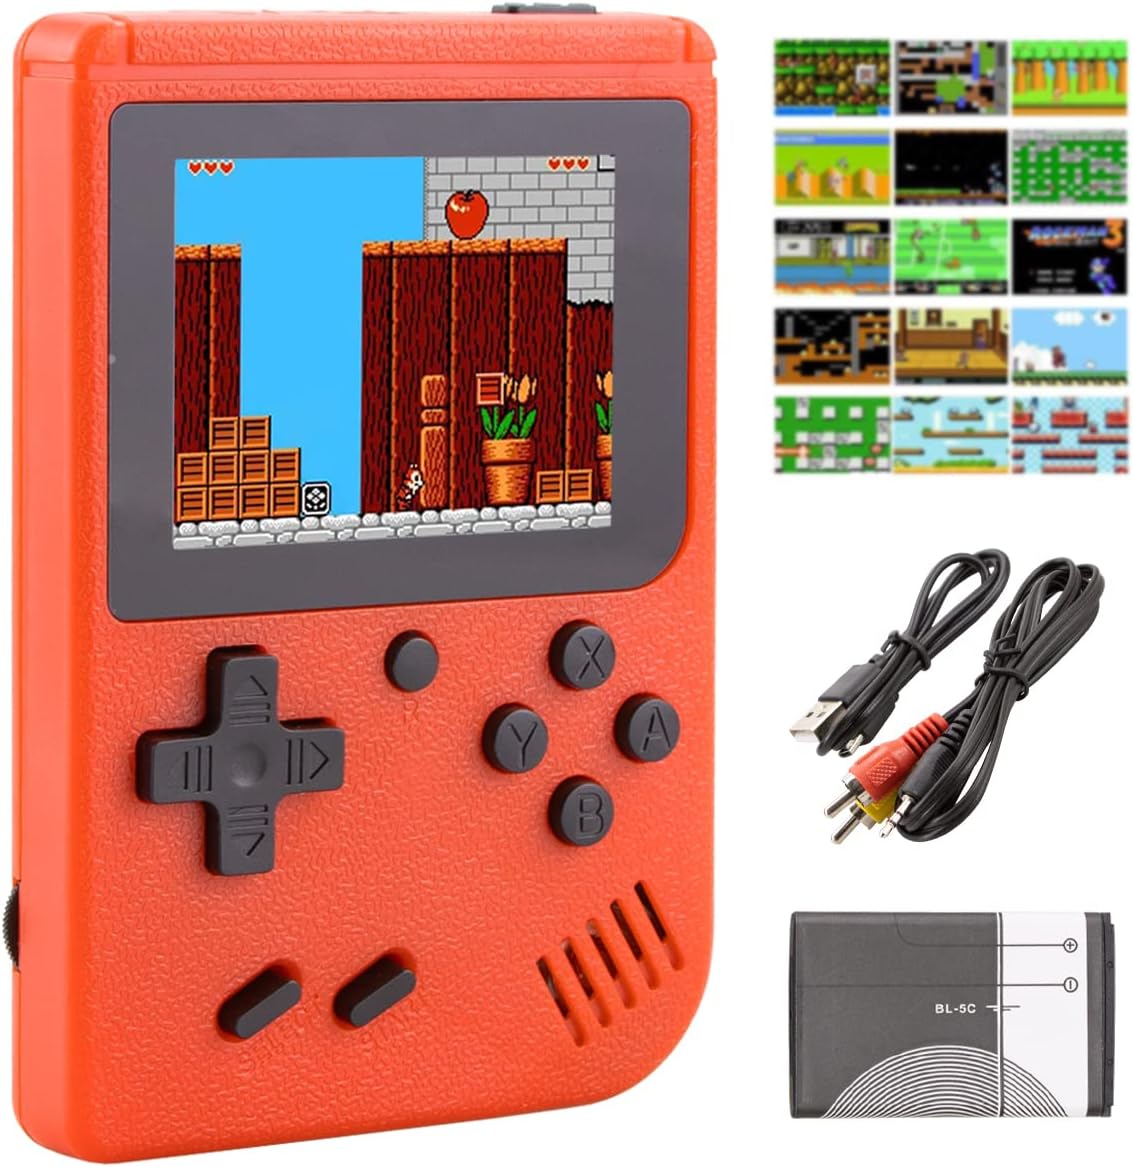 Kids Mini Handheld Game Console Review